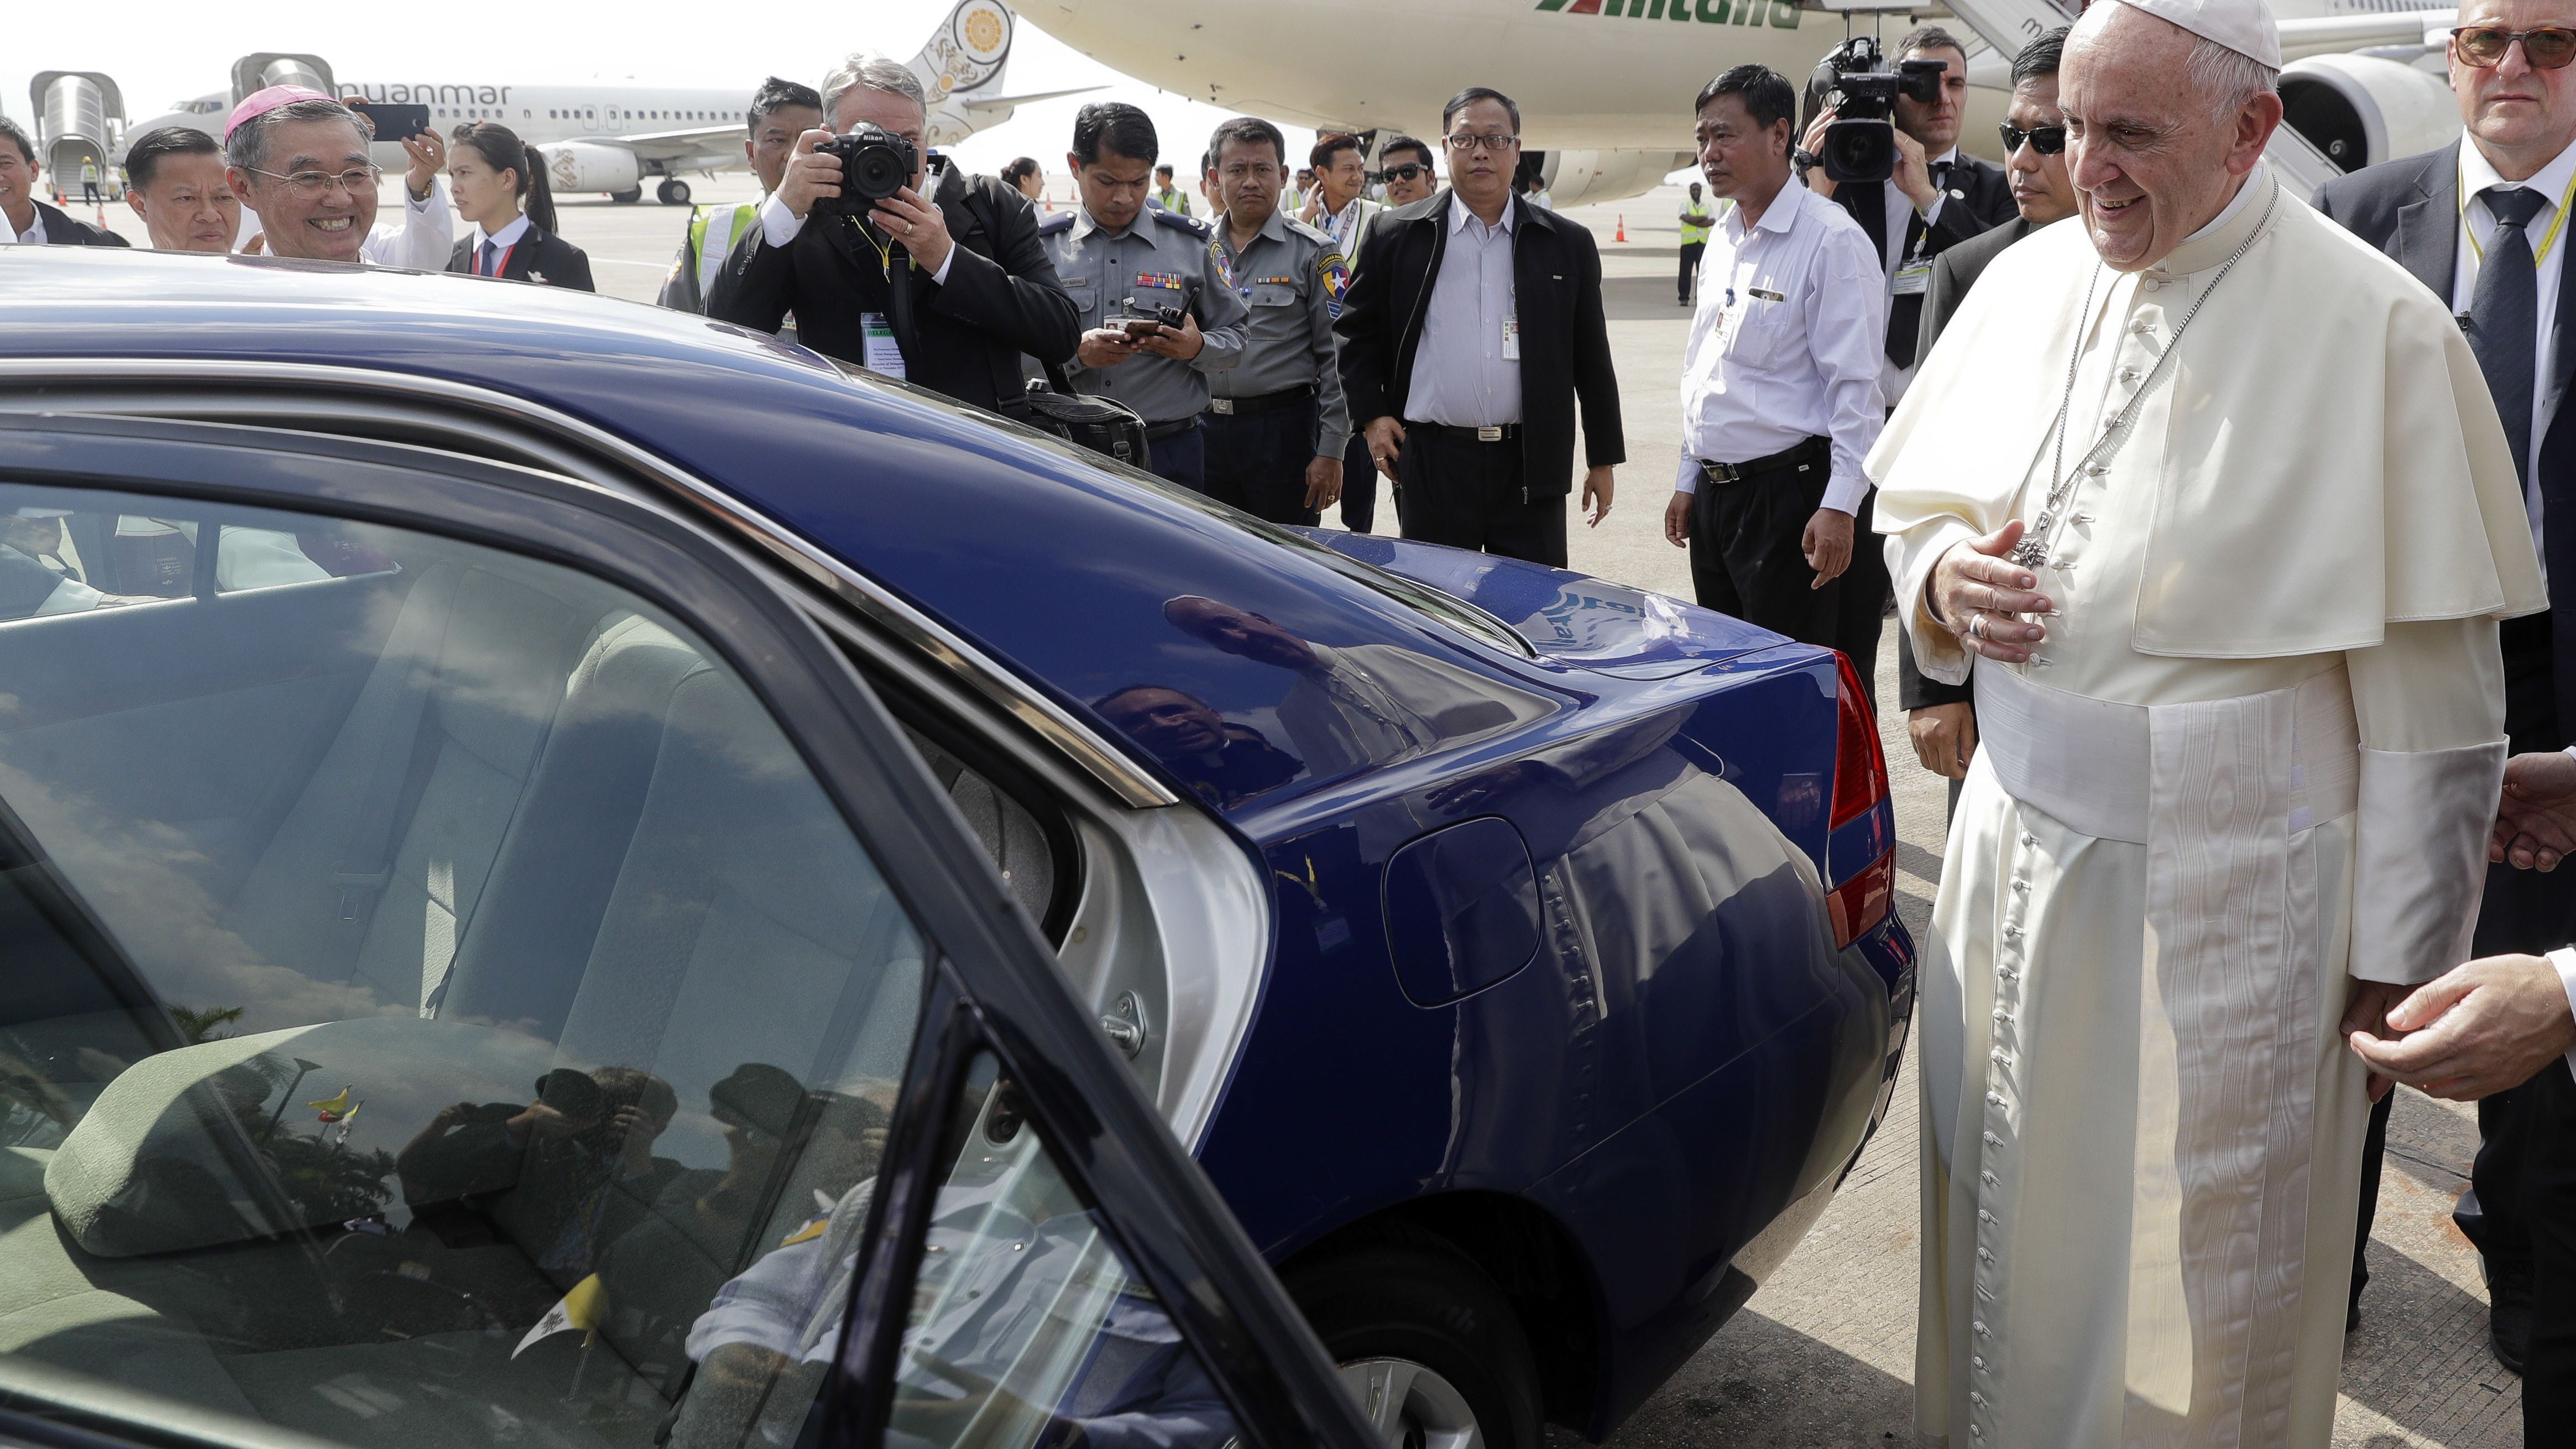 Pope Francis prepares to leave the airport.